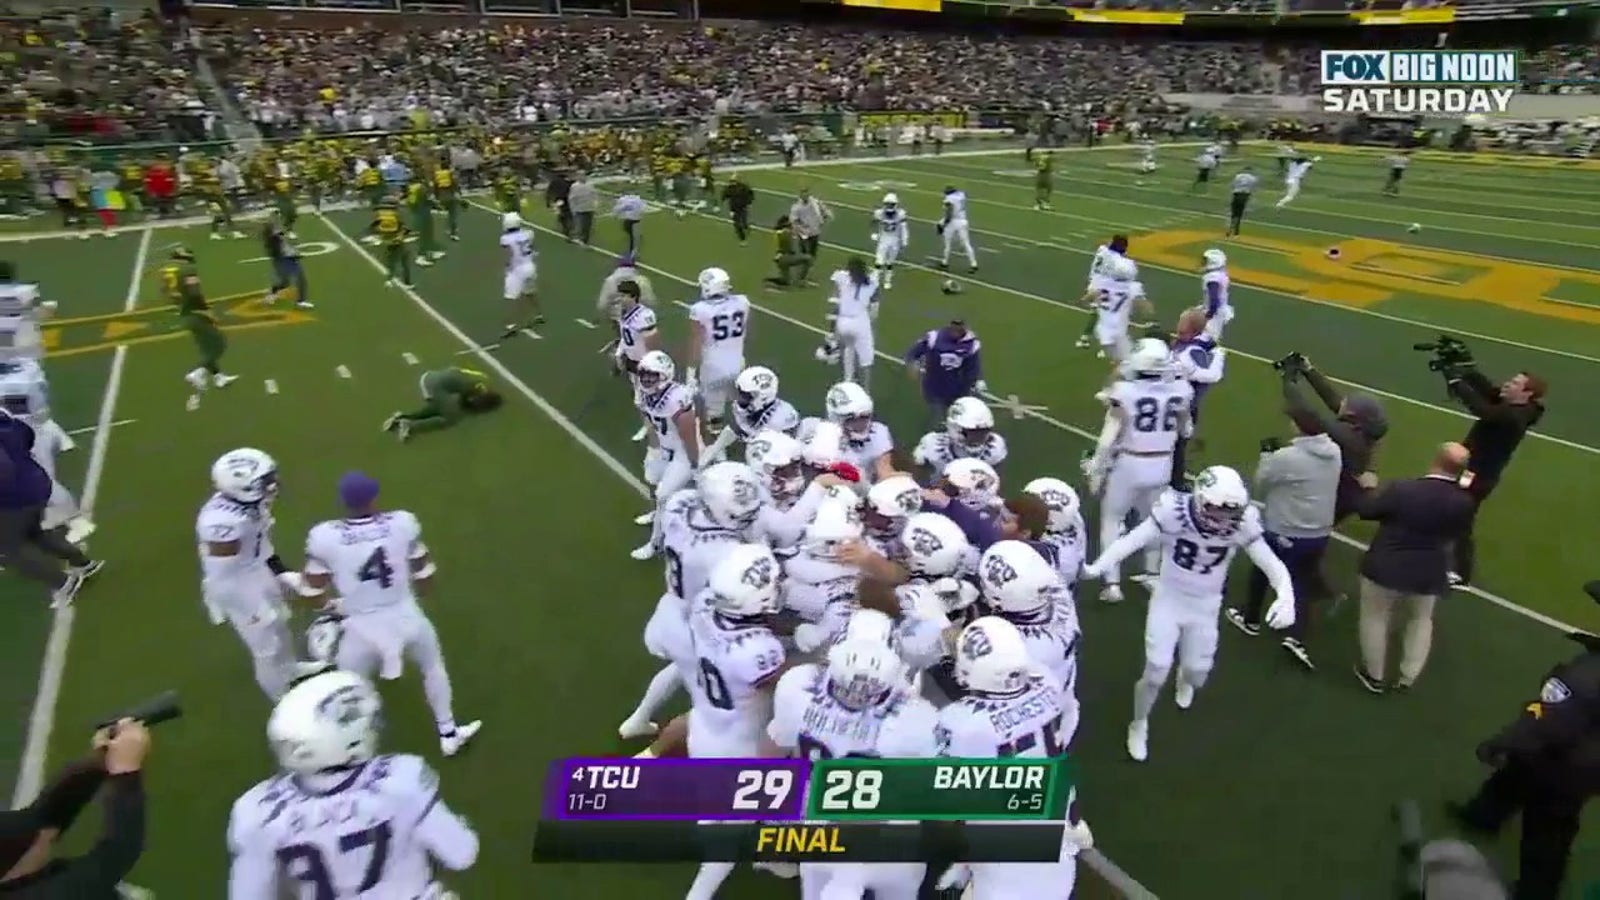 TCU stays undefeated with last-second FG